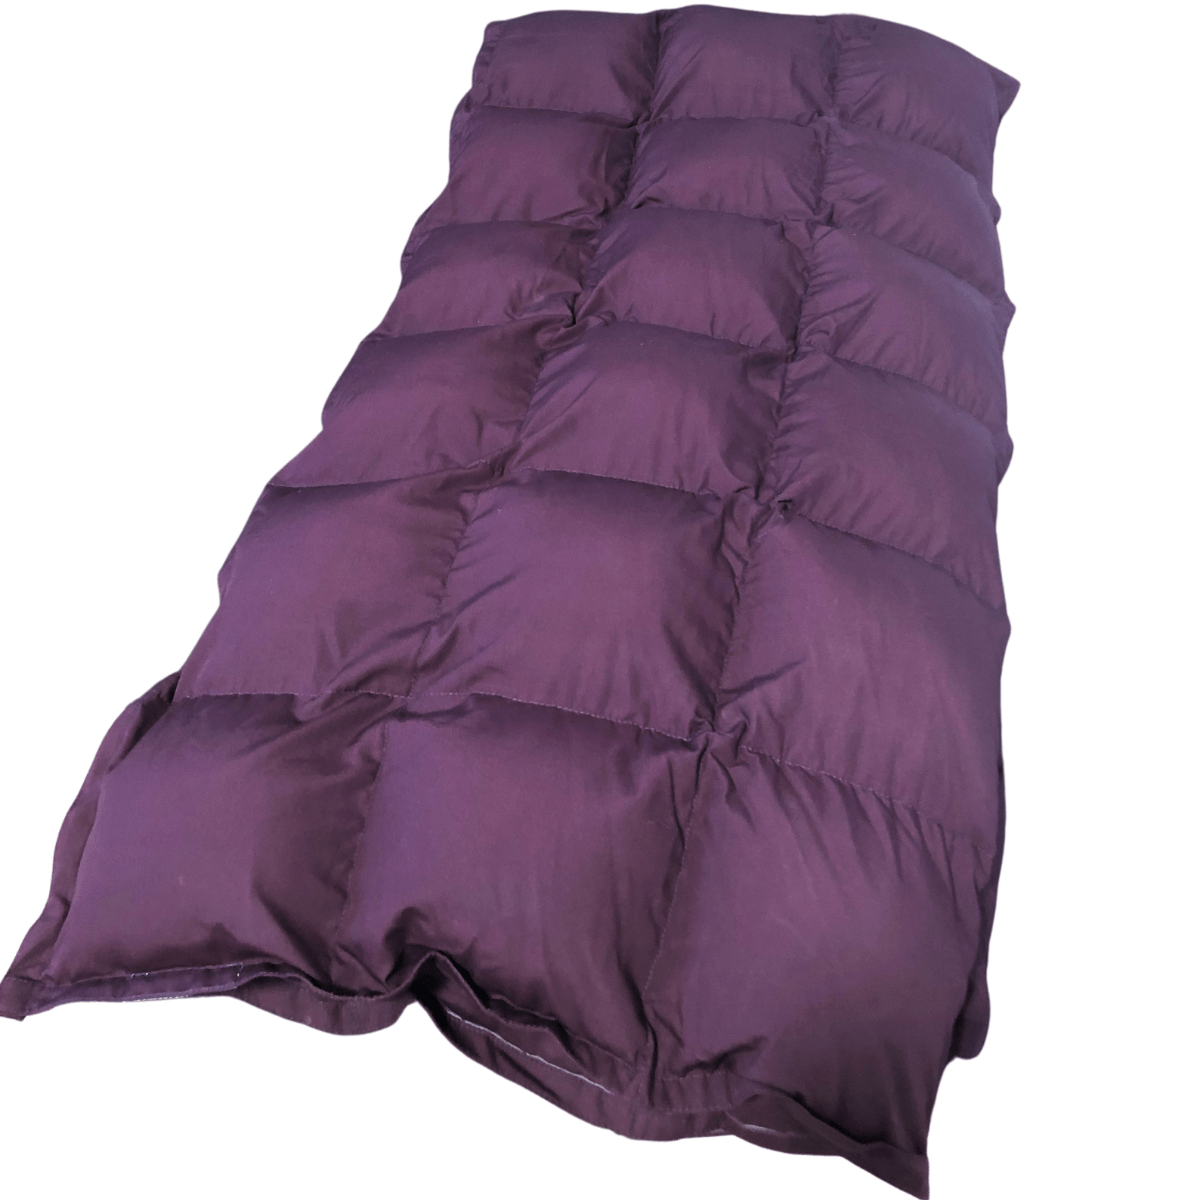 Classic Weighted Blanket - Cabernet Purple